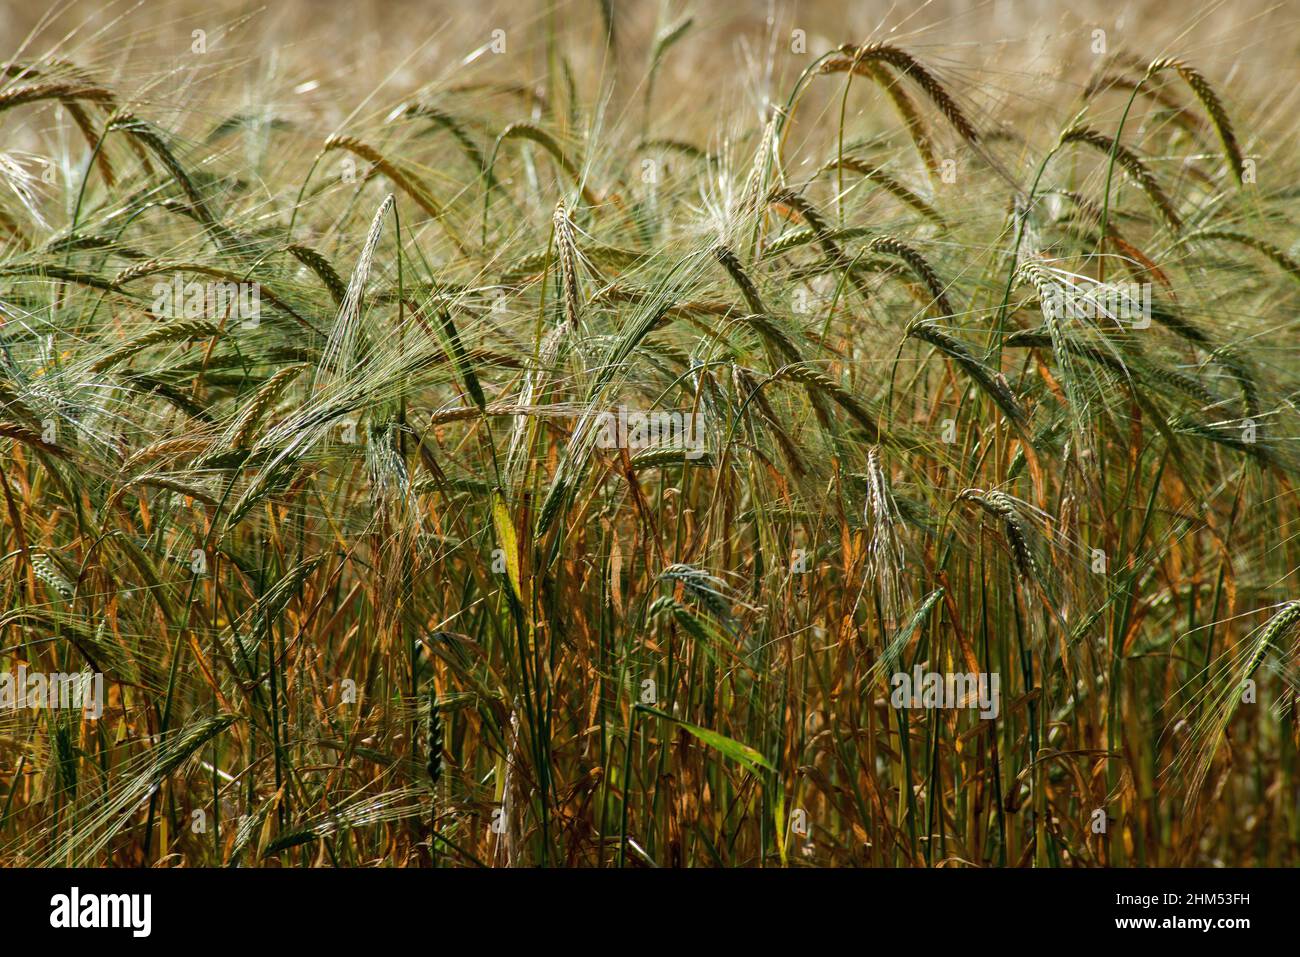 Full frame image of close up of barley plants in field with seed heads and stalks catching the sun Stock Photo